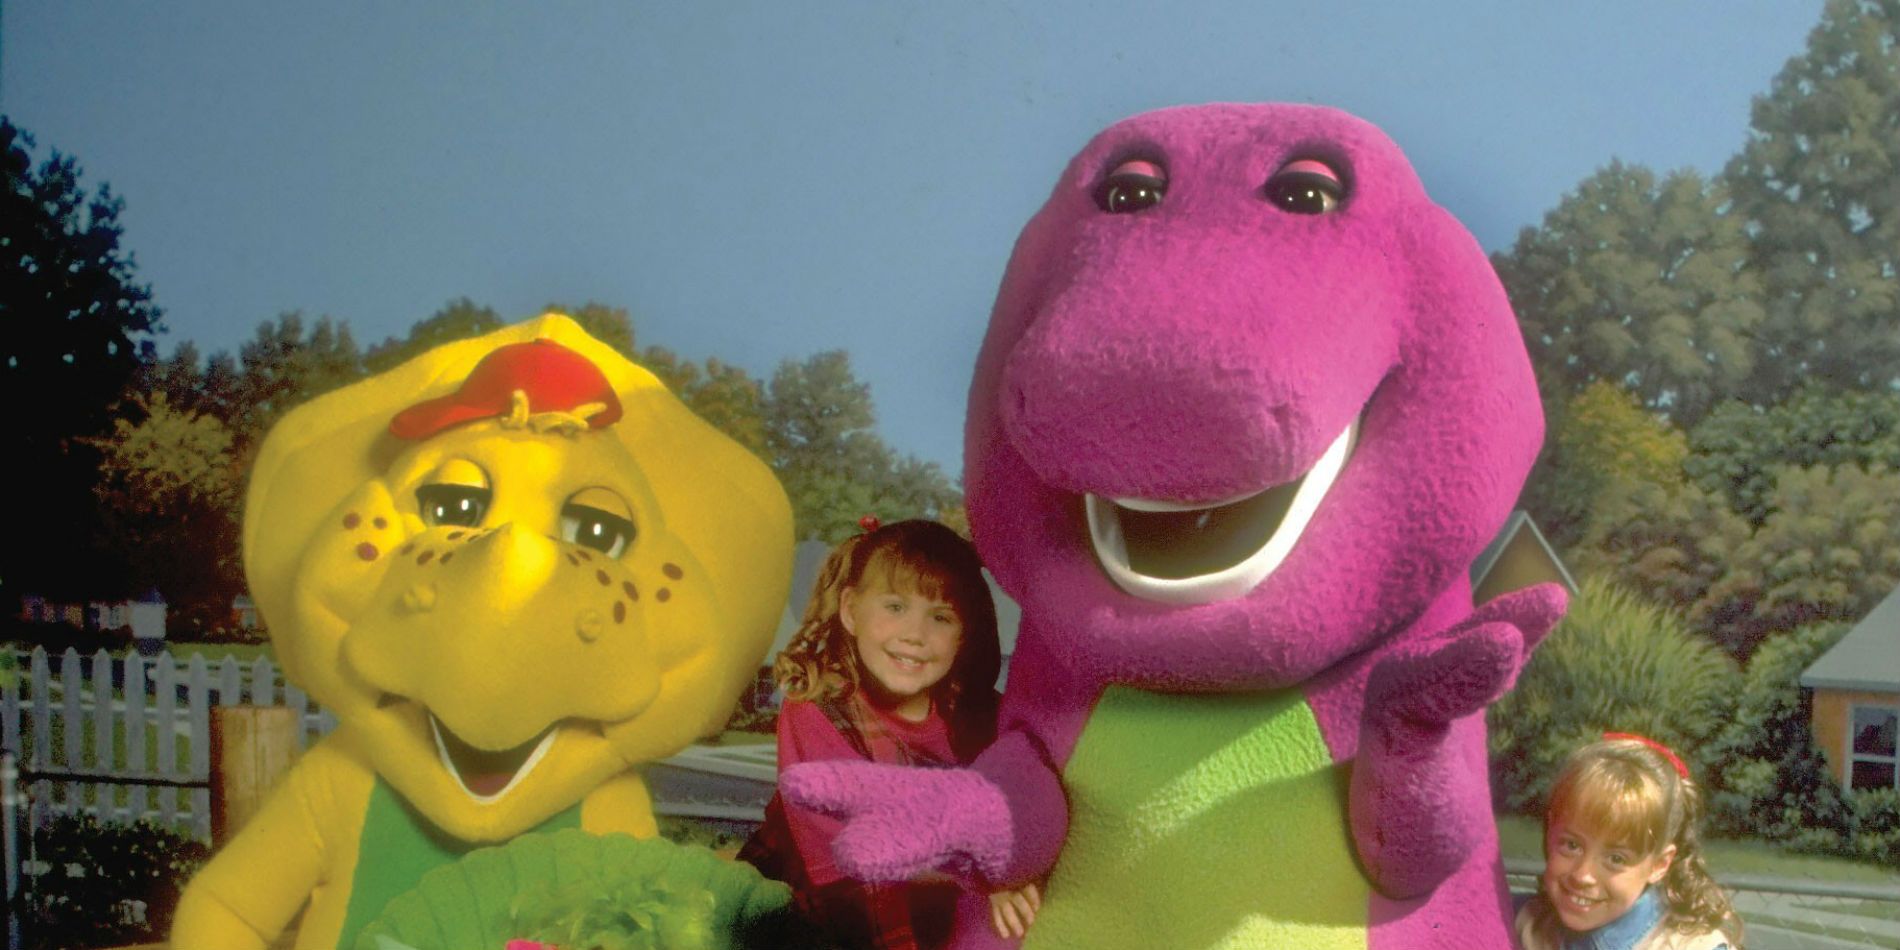 Rock With Barney Ended The Original STV Series | Screen Rant